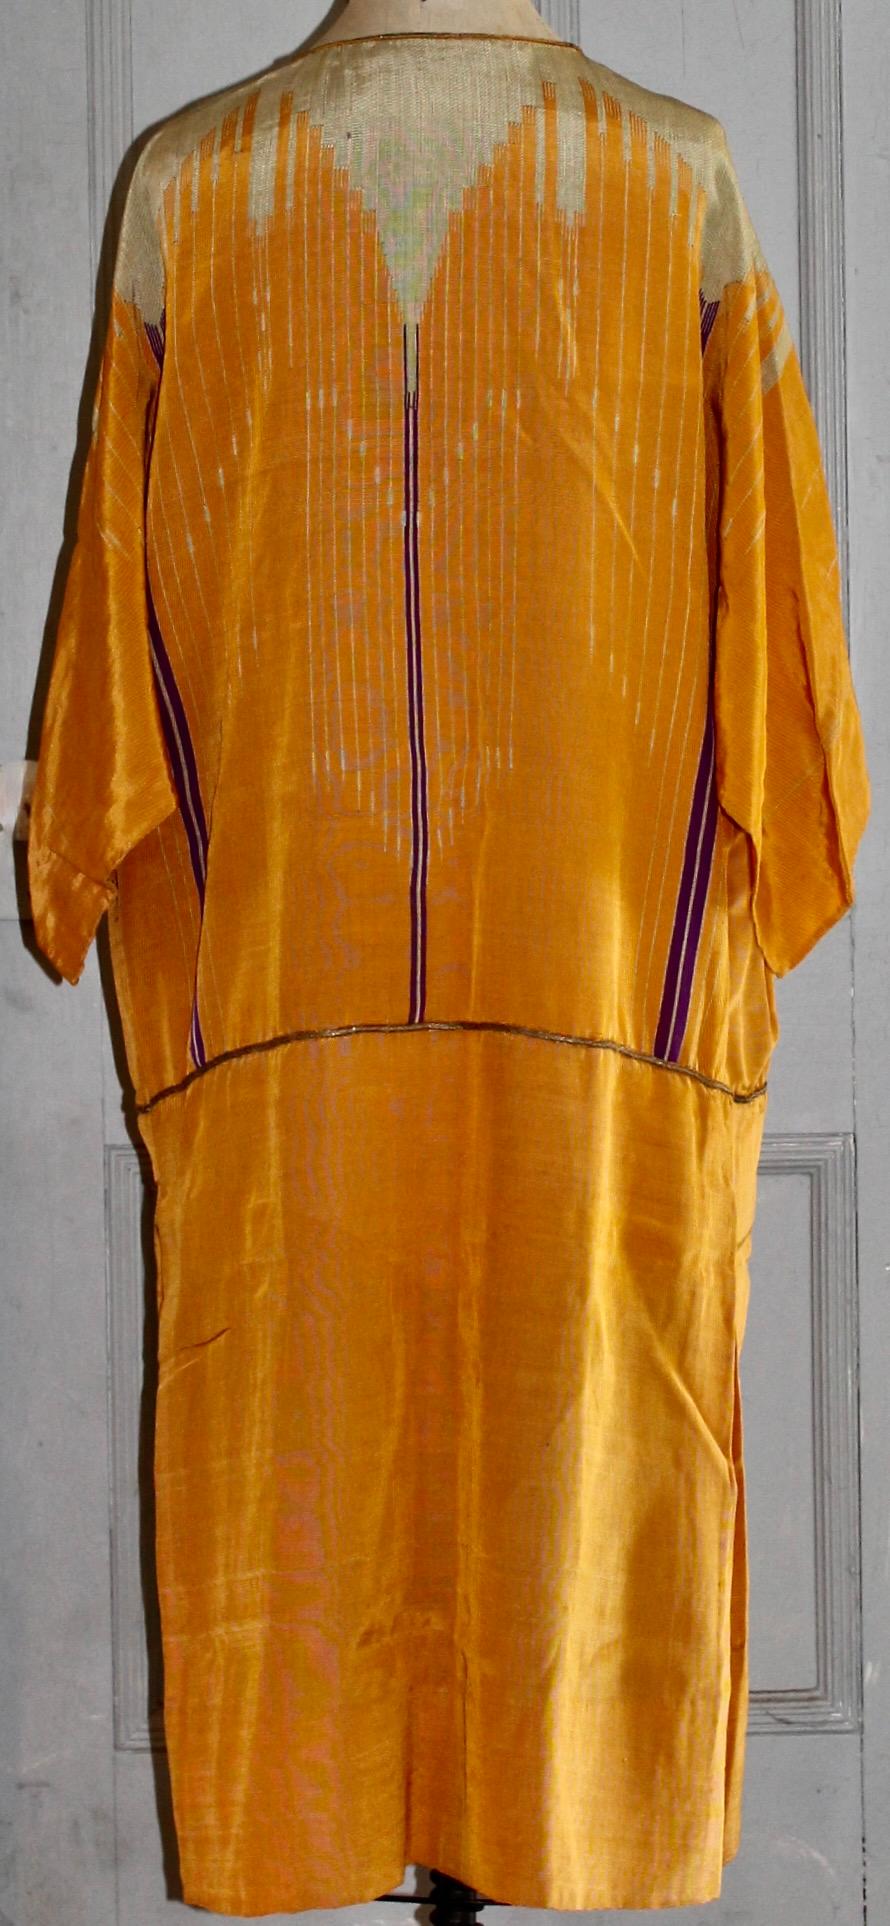 As a dress in the manner of Poiret. Silk with gold thread. Slit tapestry technique. Tablet Weaving.